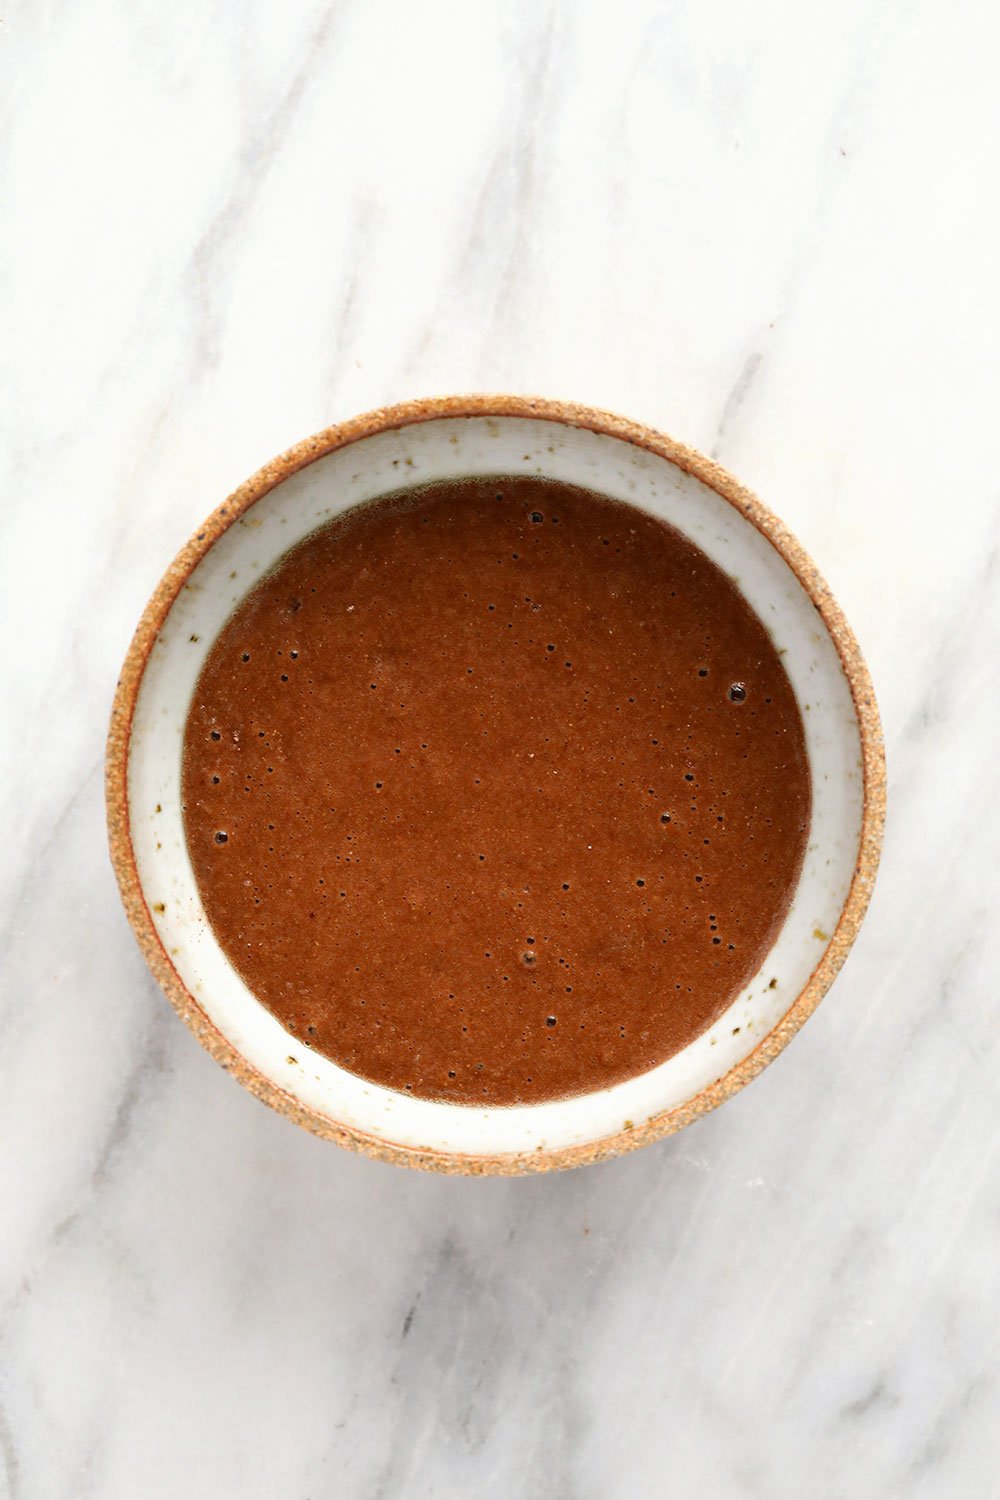 chocolate mug cake batter in a mug, ready to be baked or made in the microwave